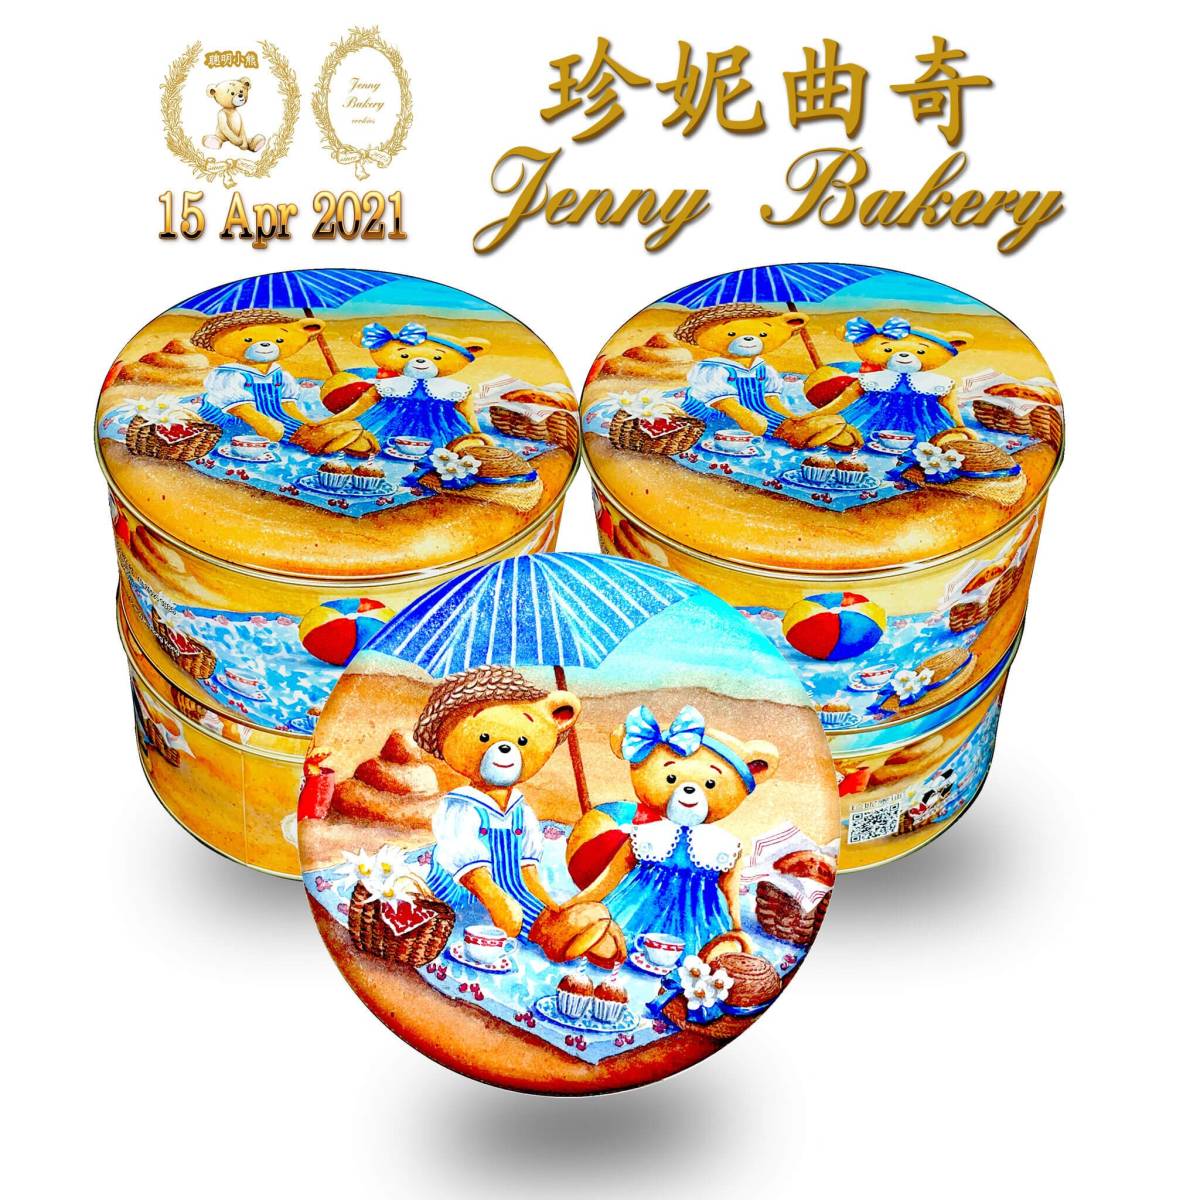  Hong Kong direct delivery goods / JennyBakery Jenny beige ka Lee cookie cookie assortment *4mix S size 320g* great popularity ....!!